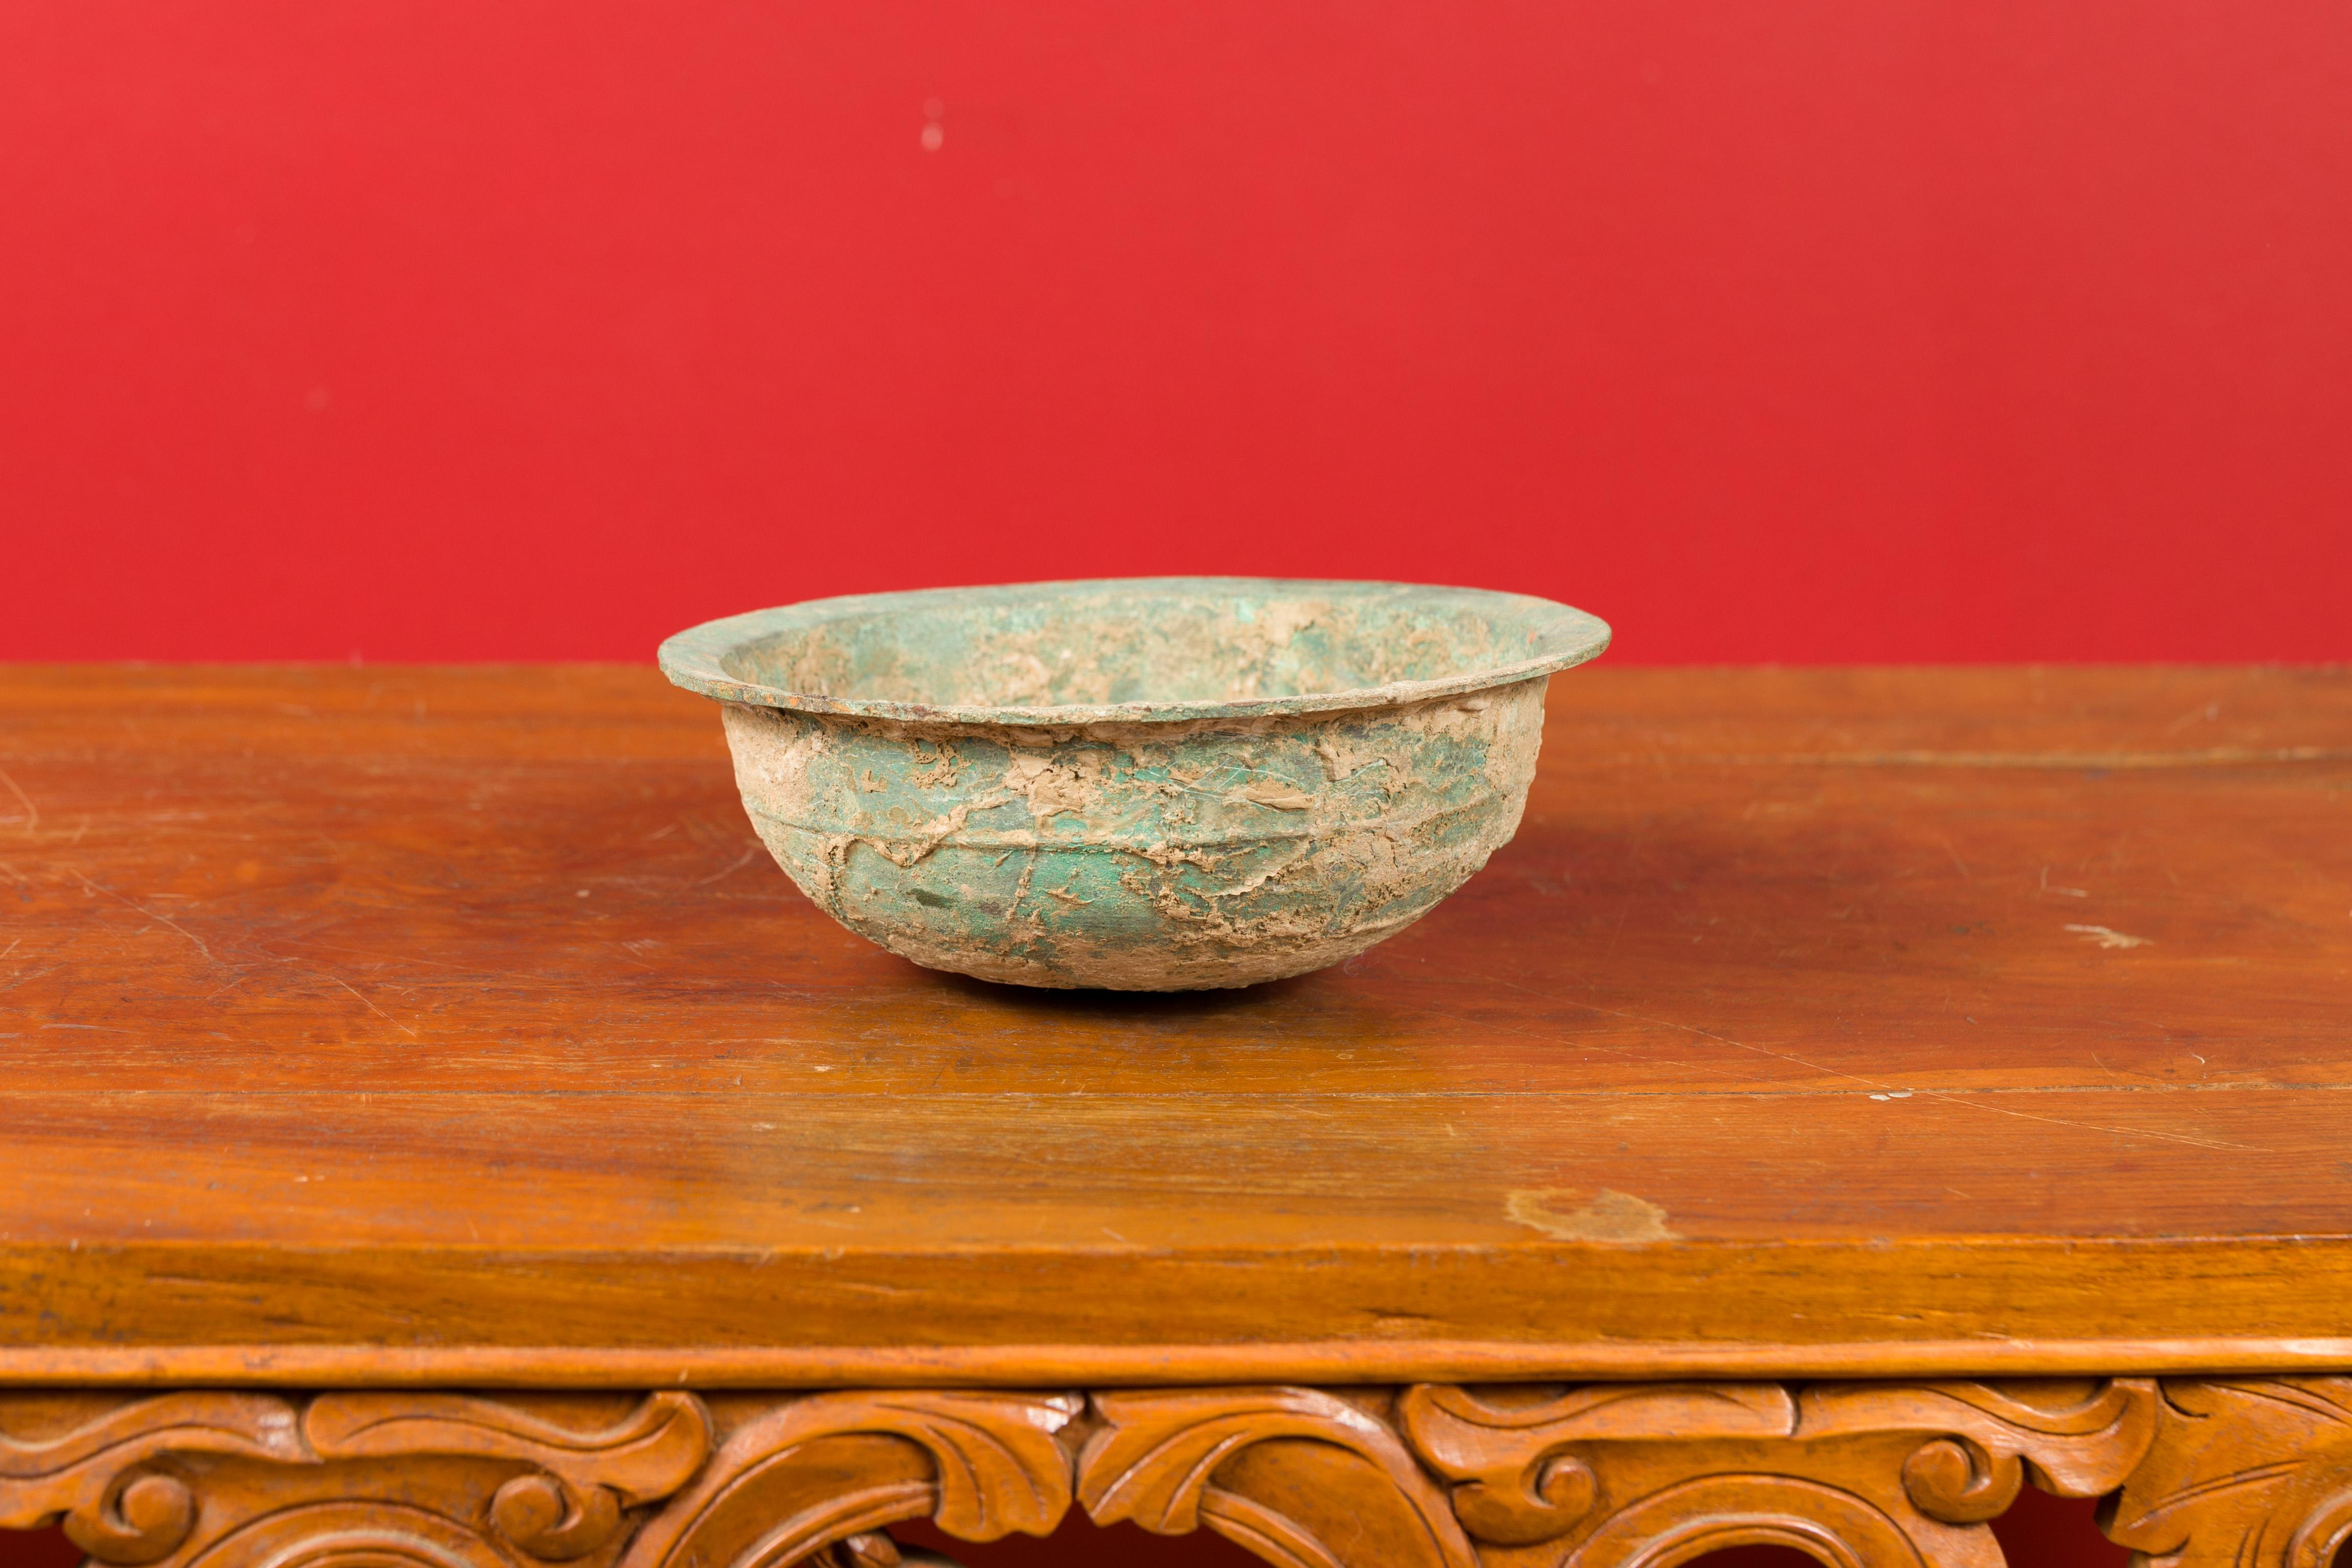 Chinese Han Dynasty Bronze Bowl circa 202 BC-200 AD with Mineral Deposits 8